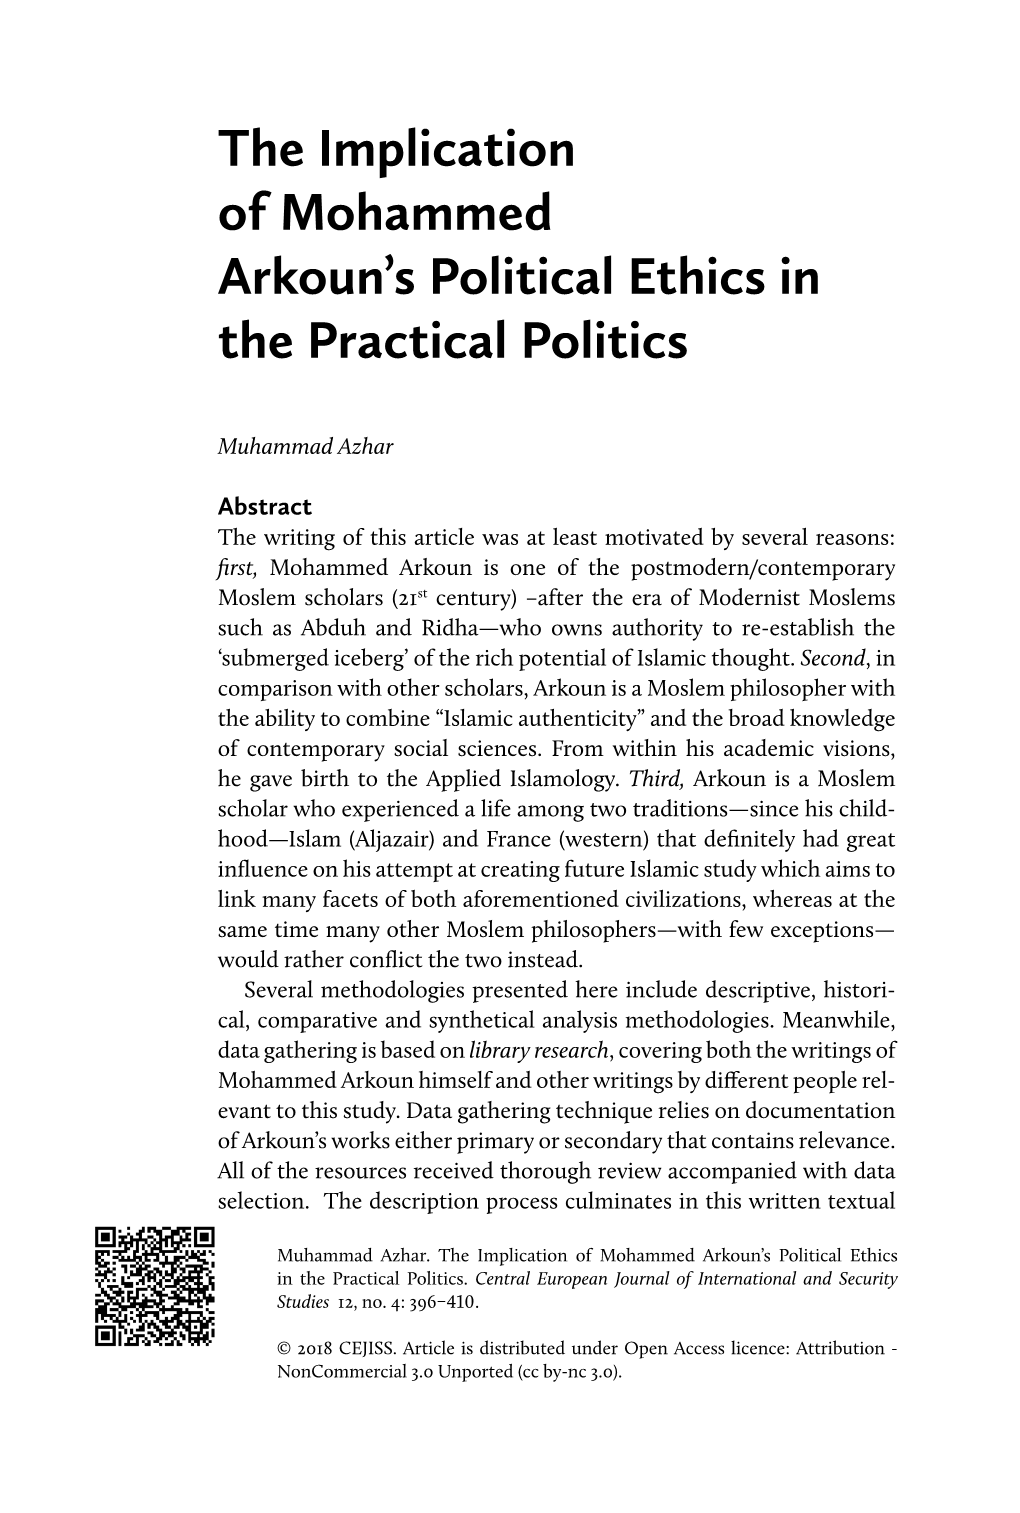 The Implication of Mohammed Arkoun's Political Ethics in the Practical Politics